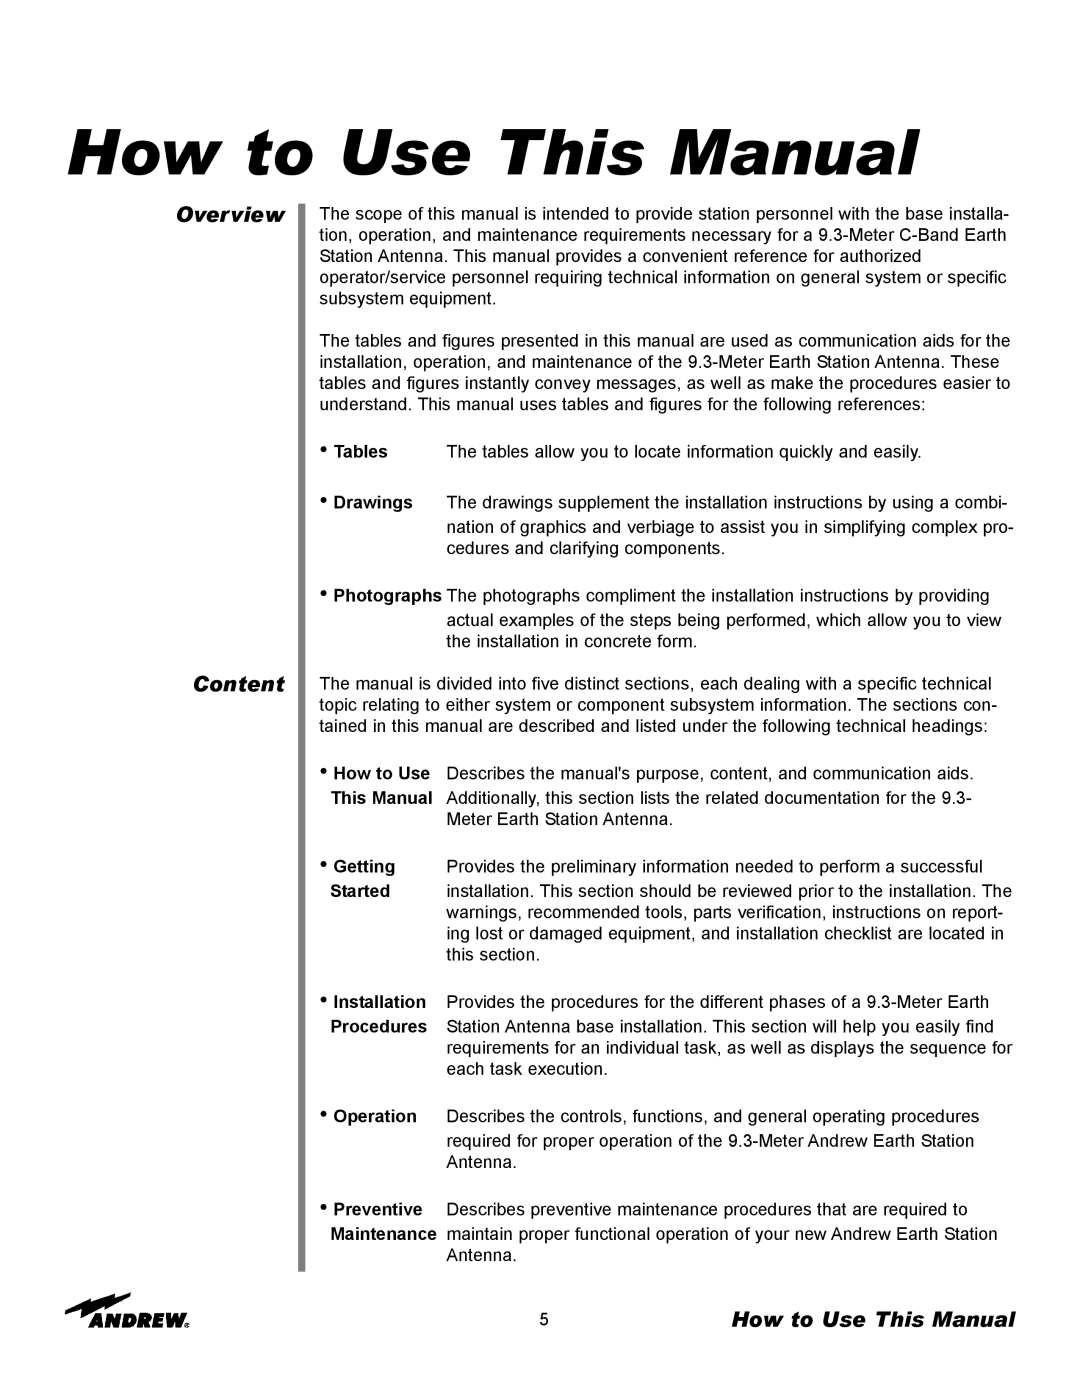 Andrew 9.3-Meter ESA manual How to Use This Manual, Overview Content 